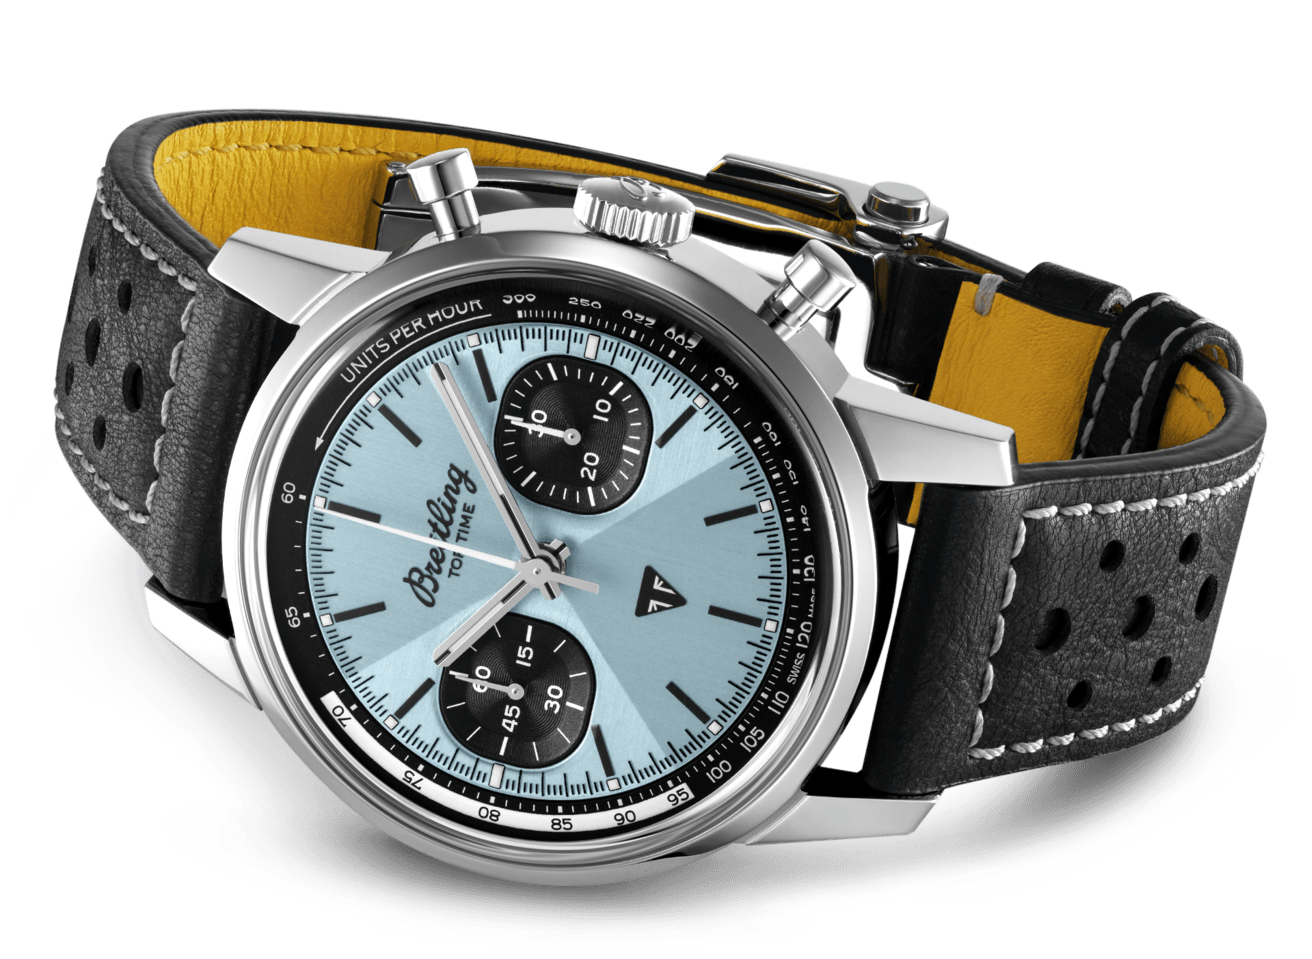 Breitling's New Top Time Triumph Collab Is a Nod to '60s Moto Culture